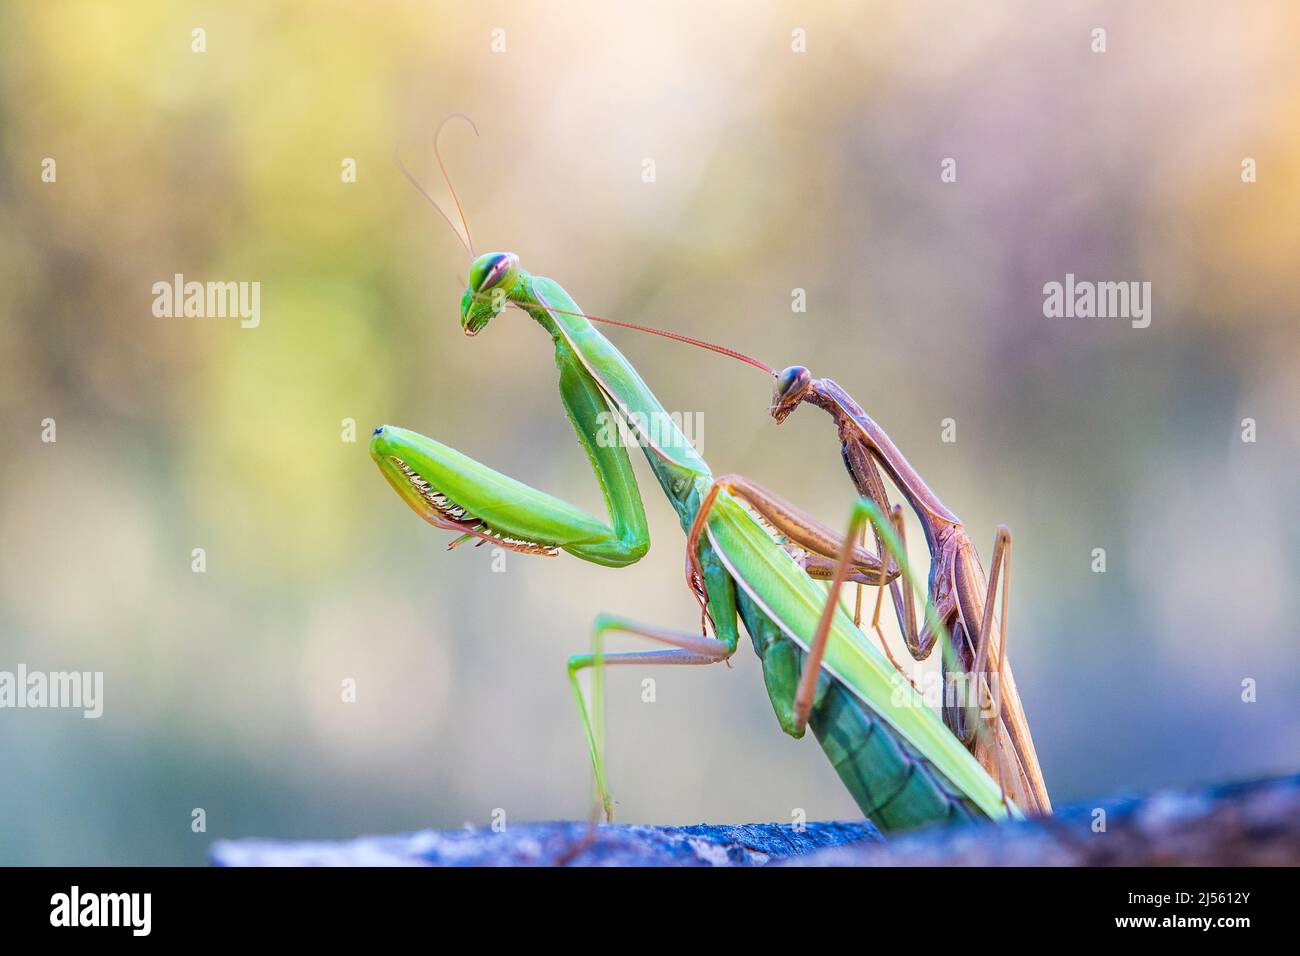 The European mantis or praying mantis (Mantis religiosa), mating between a brown male and a green female. Stock Photo